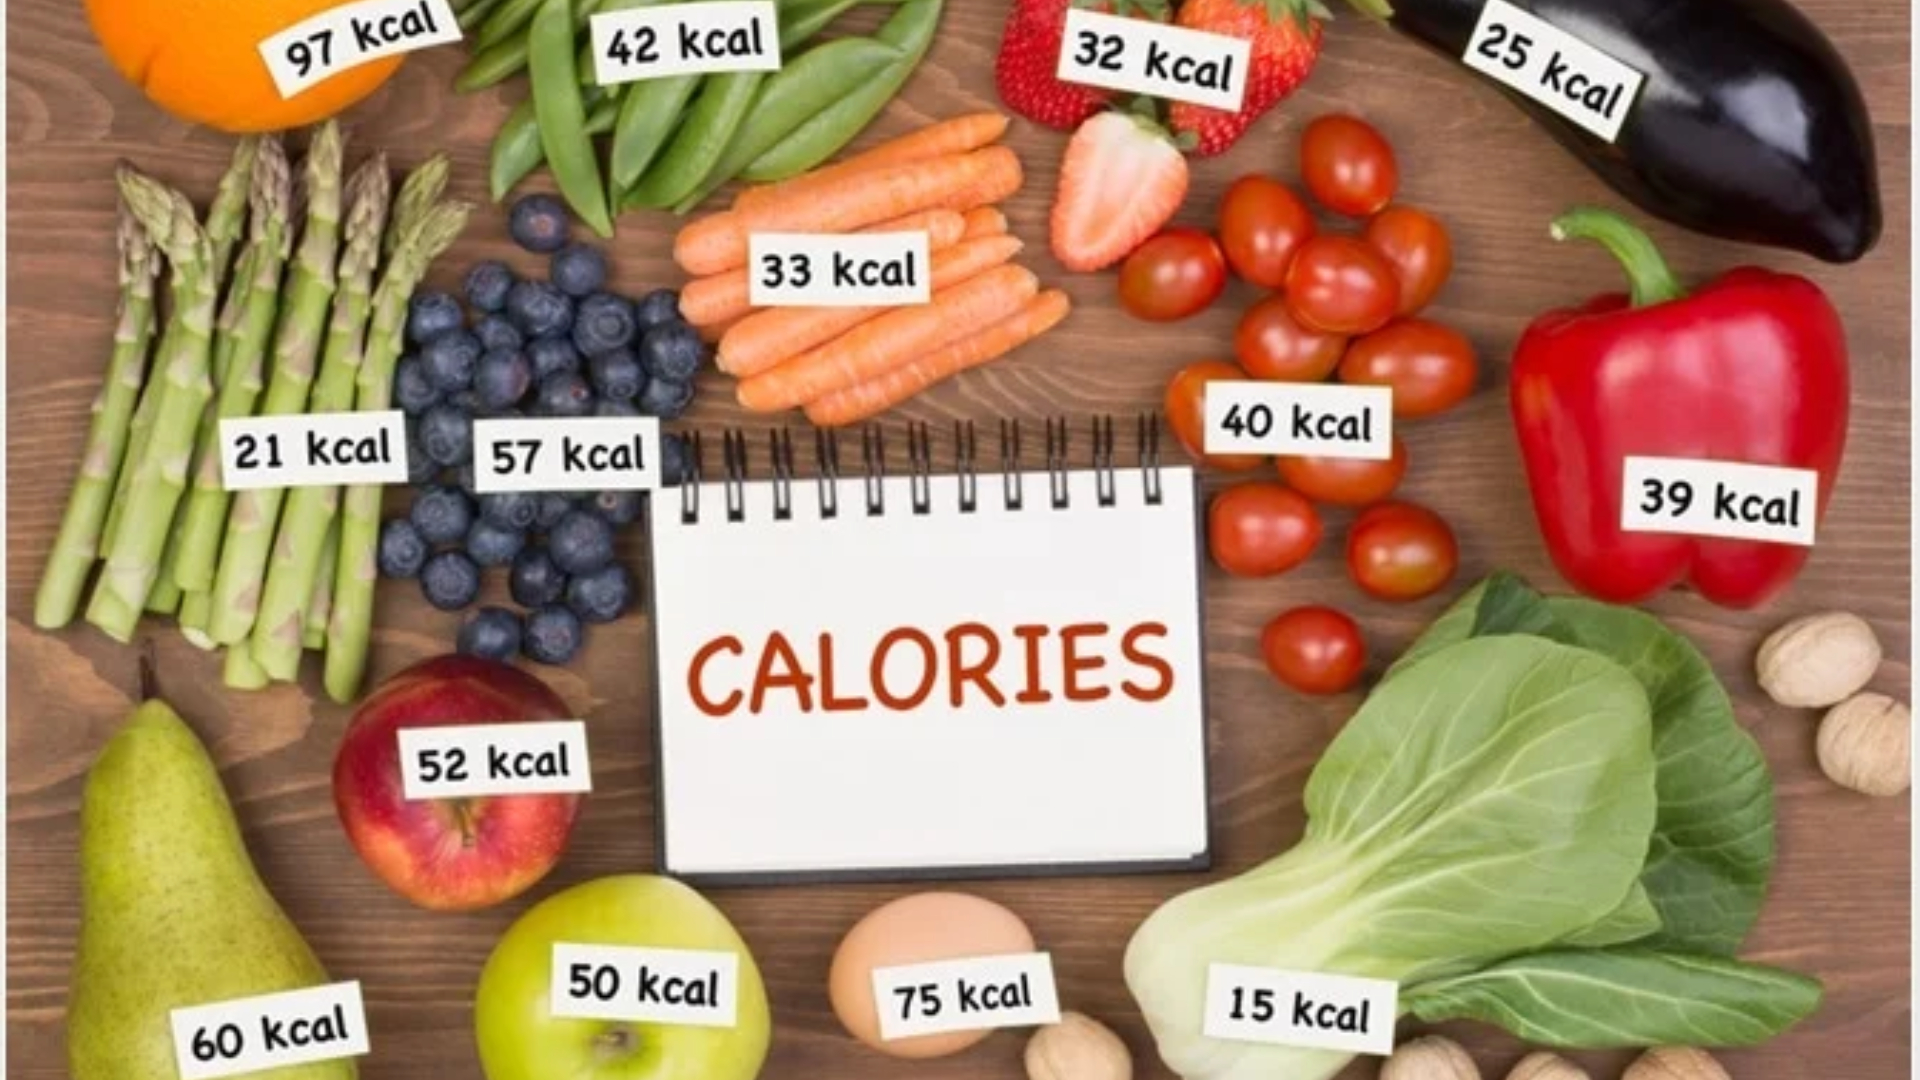 How Many Calories Should I Eat to Lose Weight? image